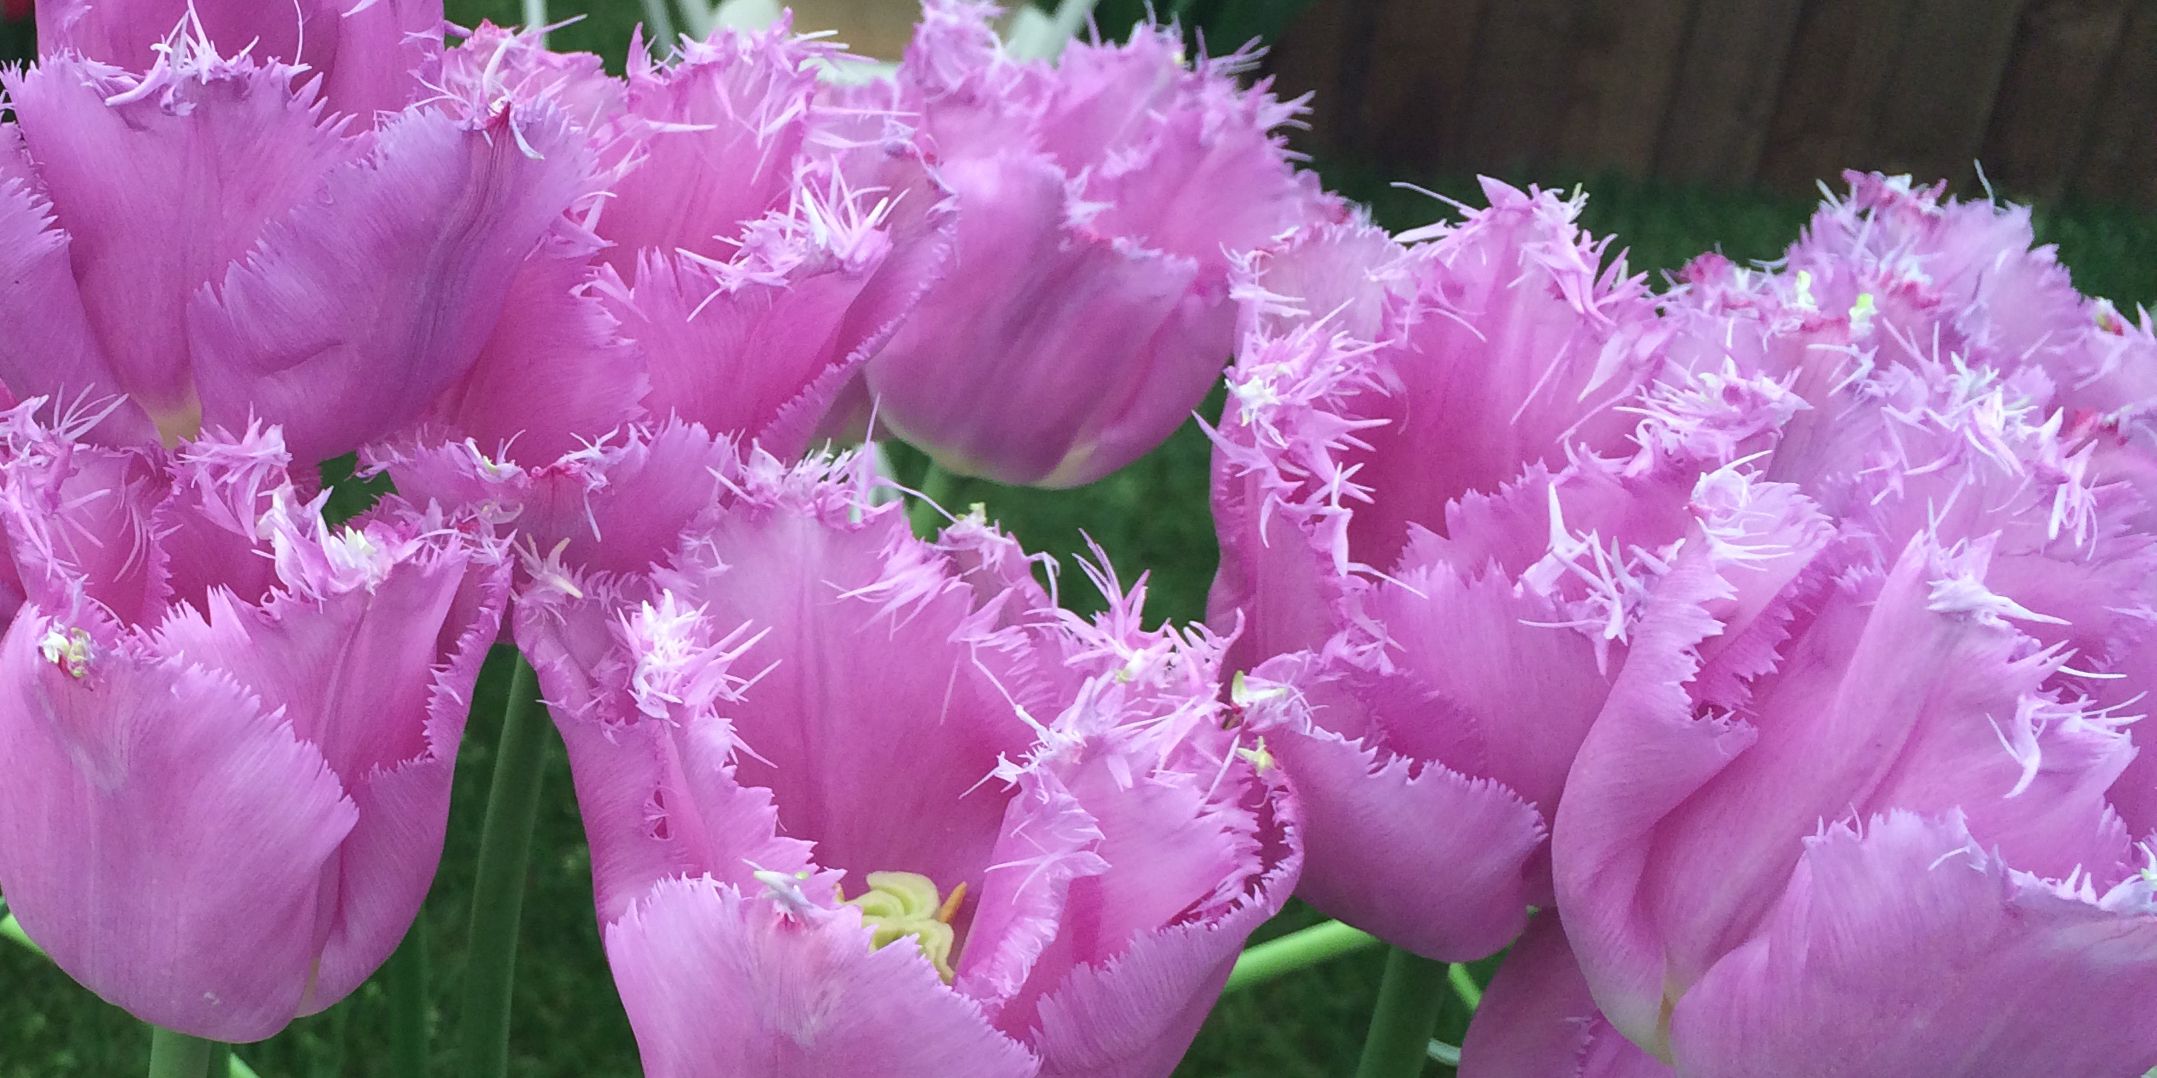 11 facts every tulip lover should know